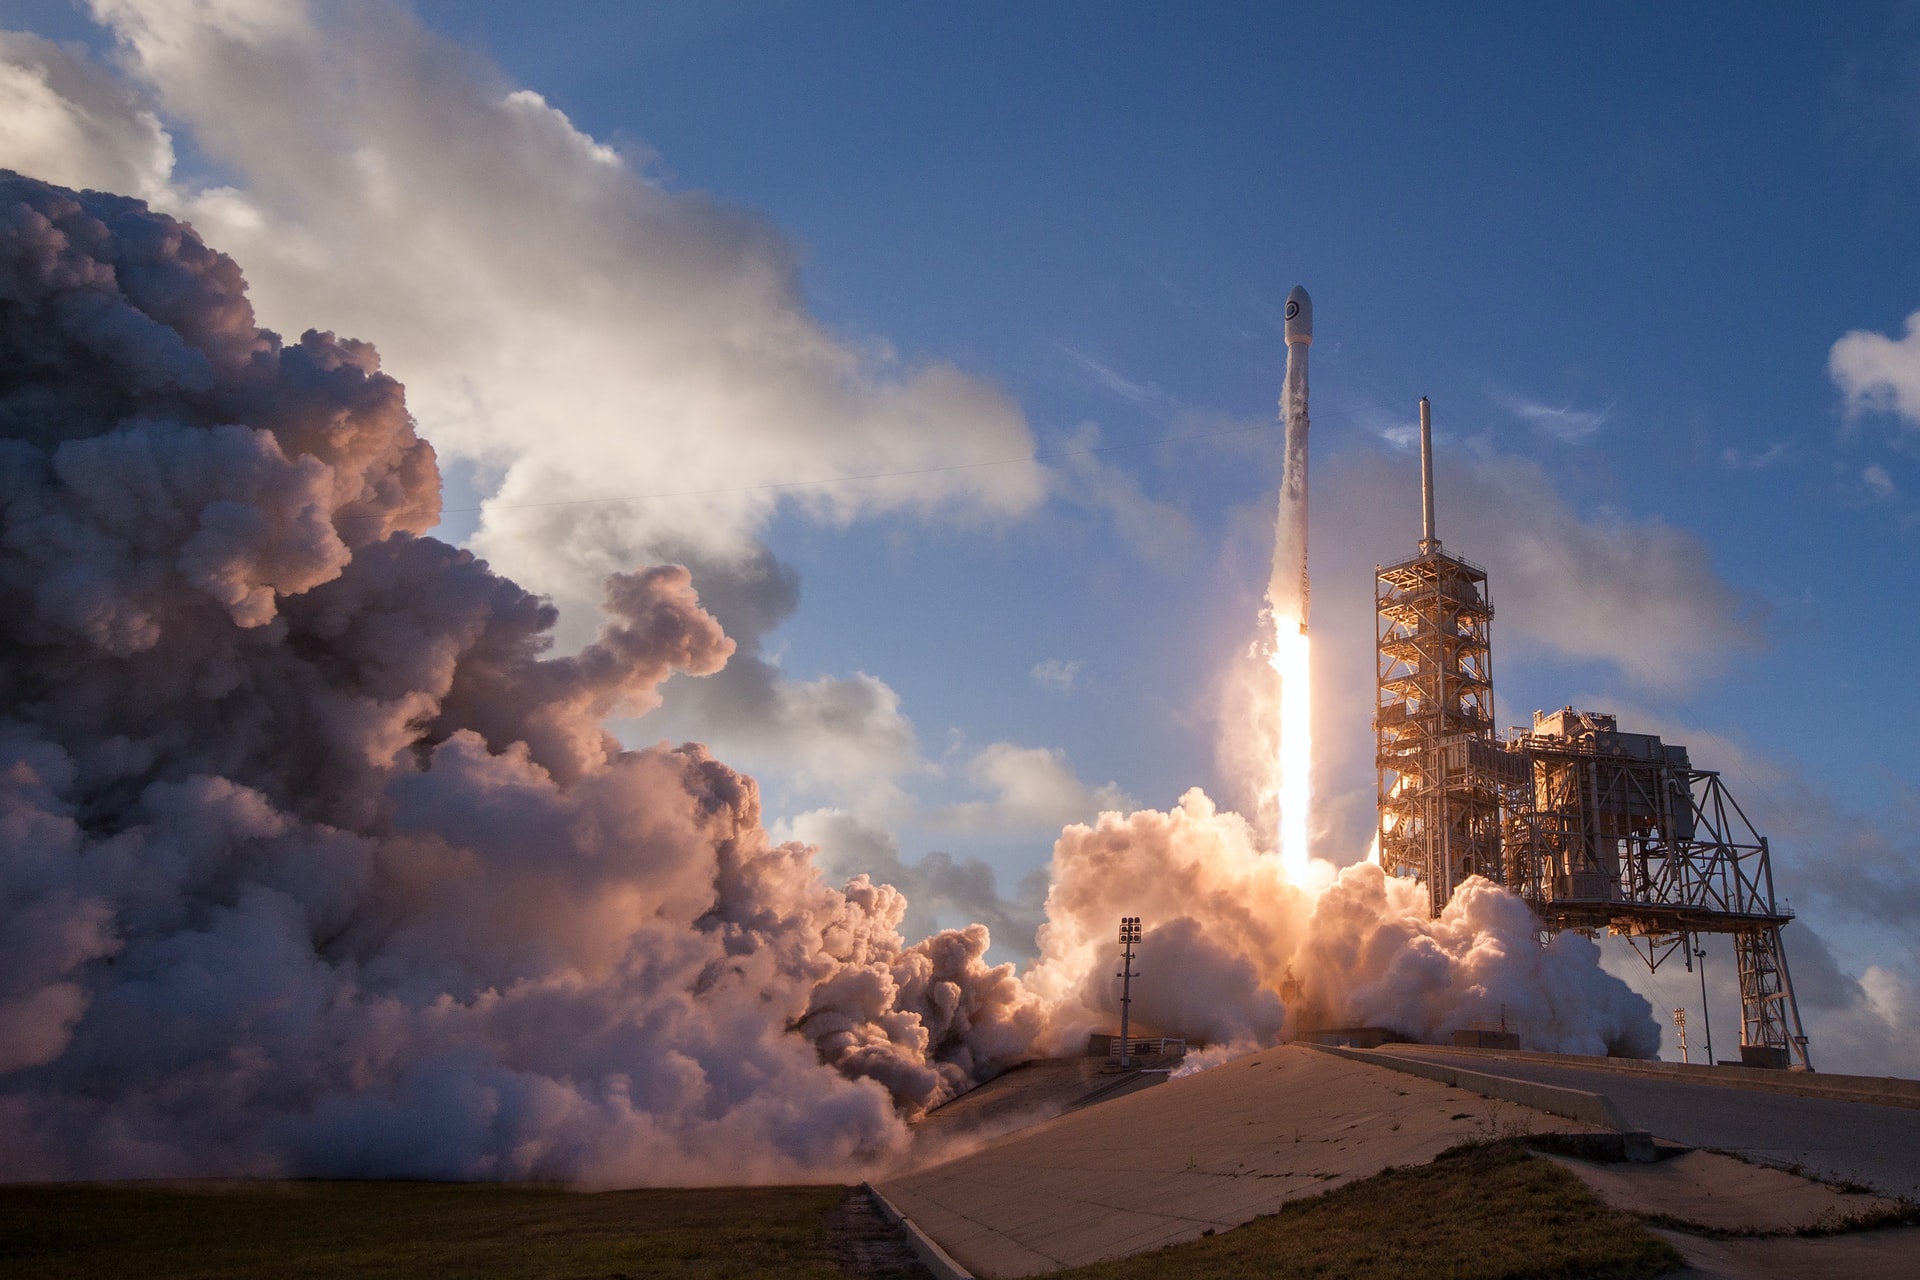 3D Printing Pushes the Limits of Rocket Technology